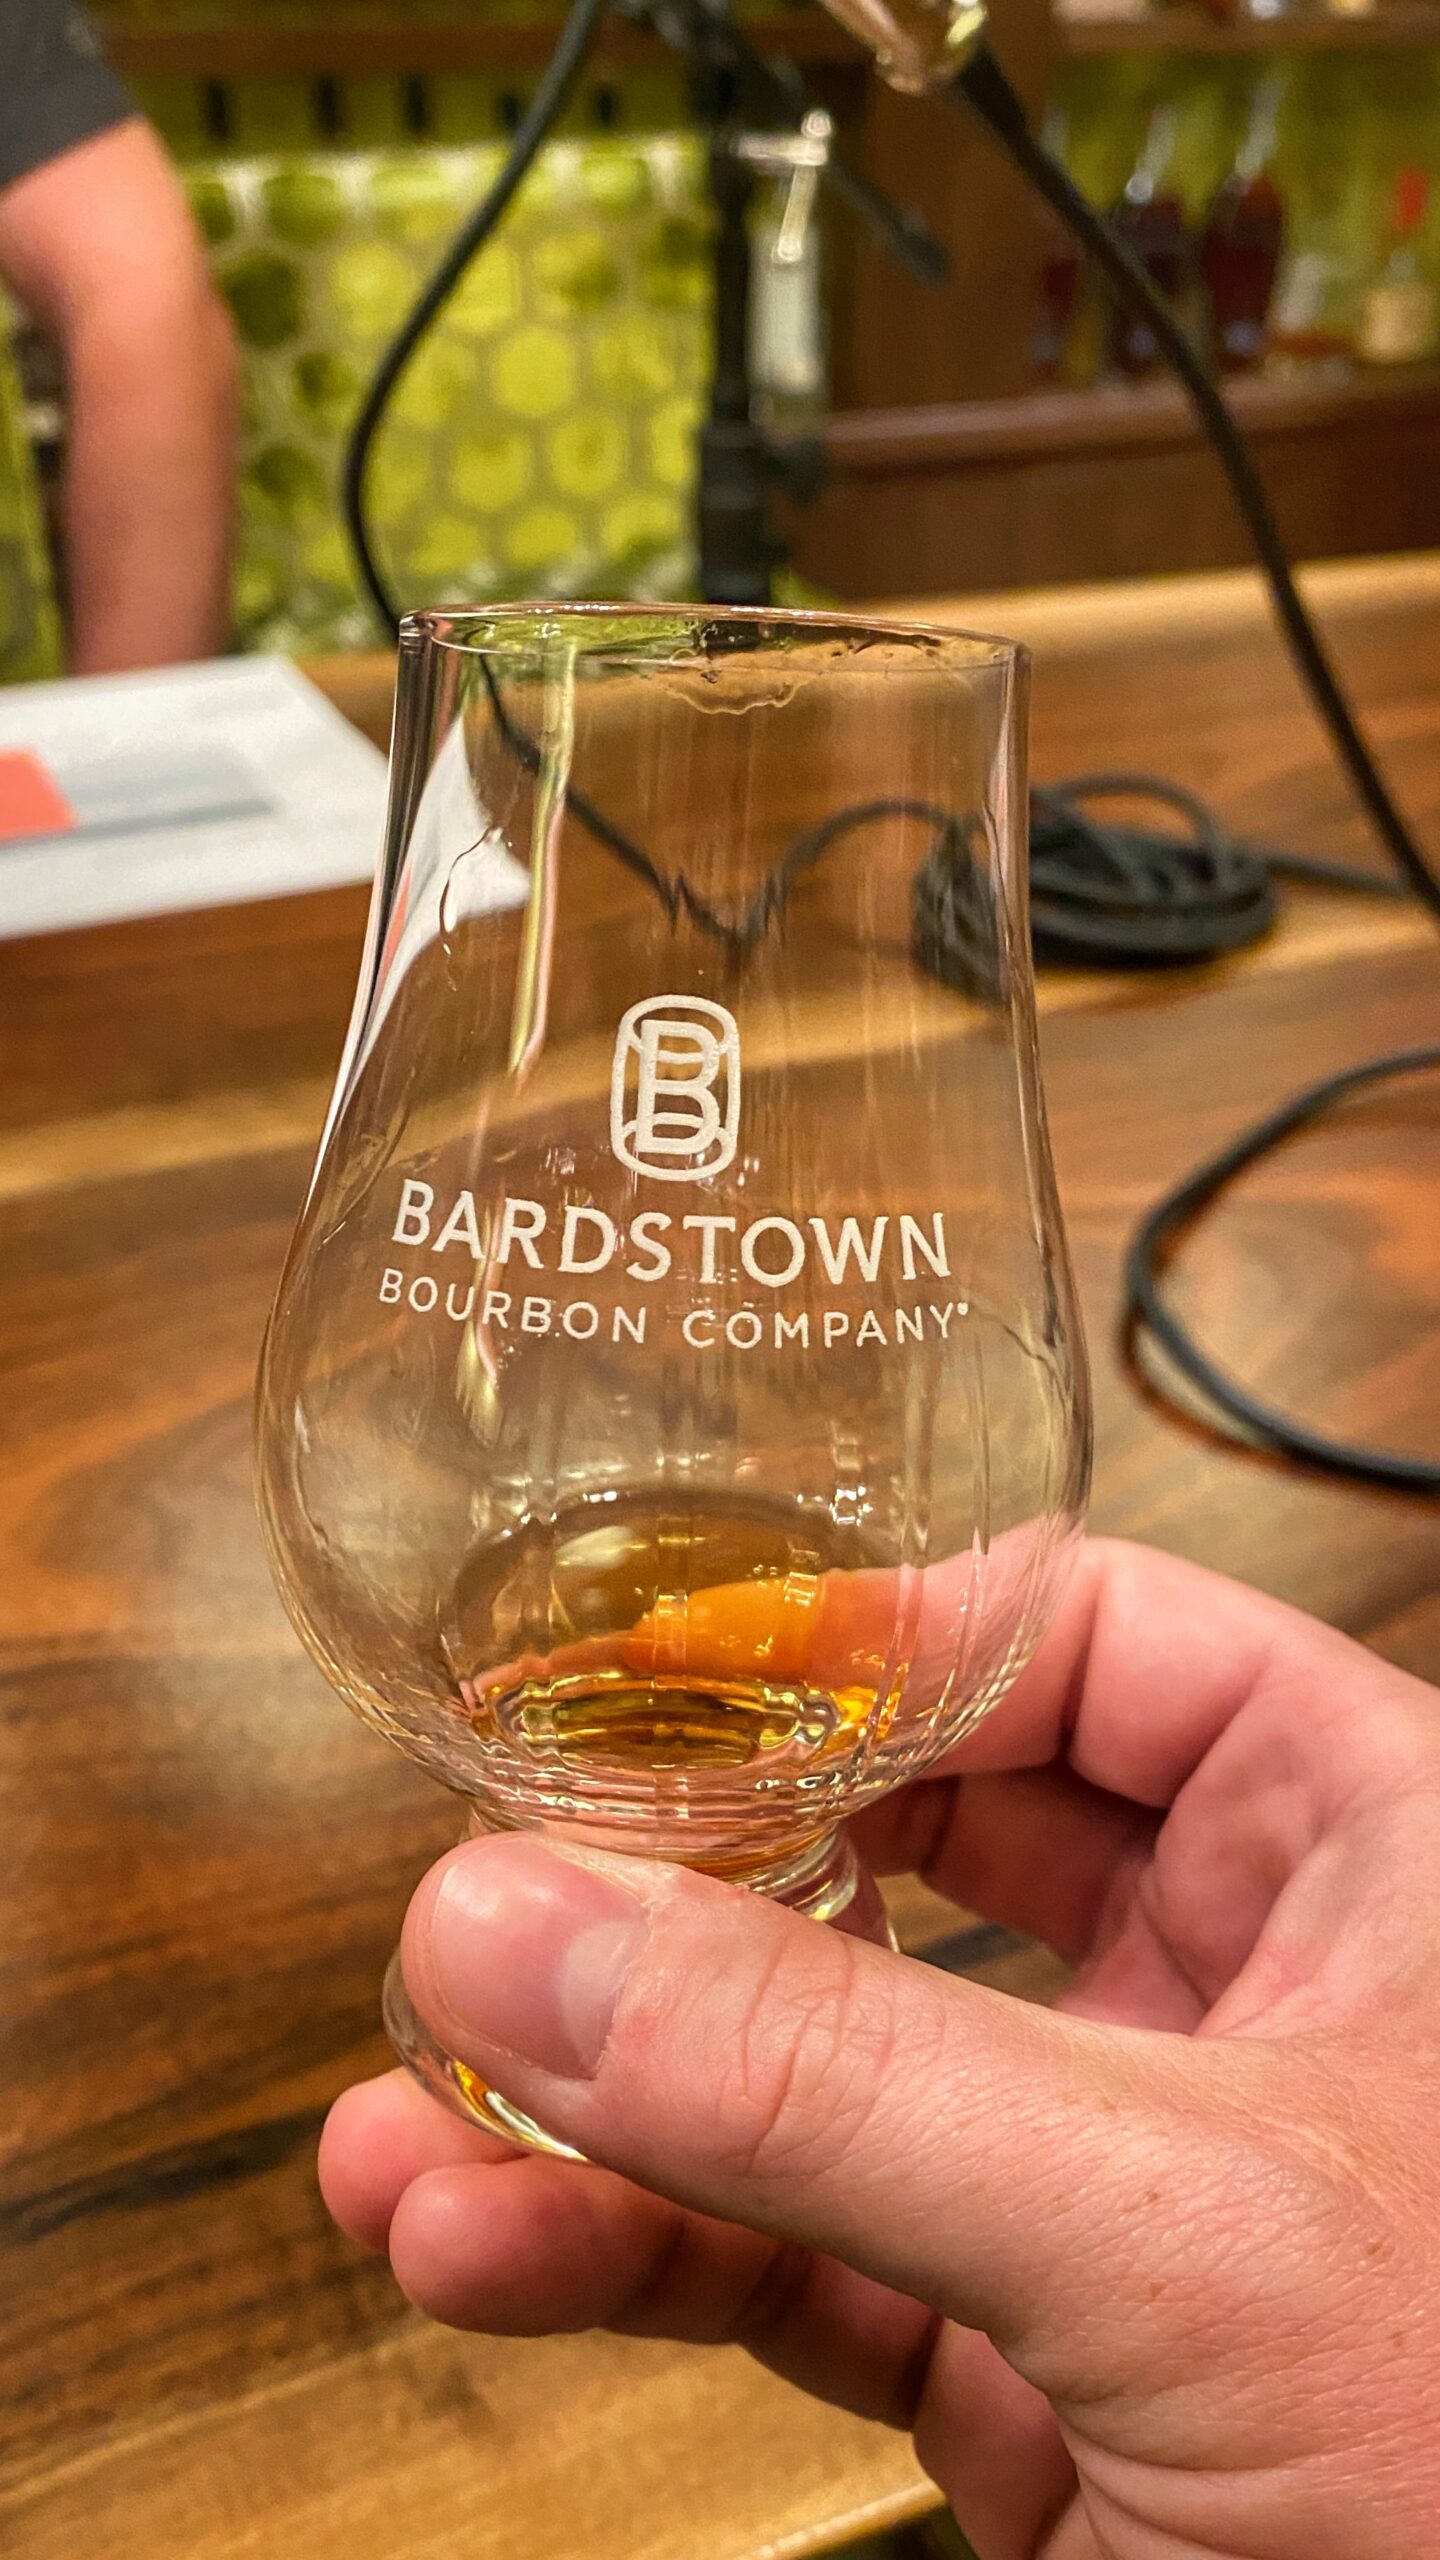 191: Inside the Vintage Whiskey Library at Bardstown Bourbon Company